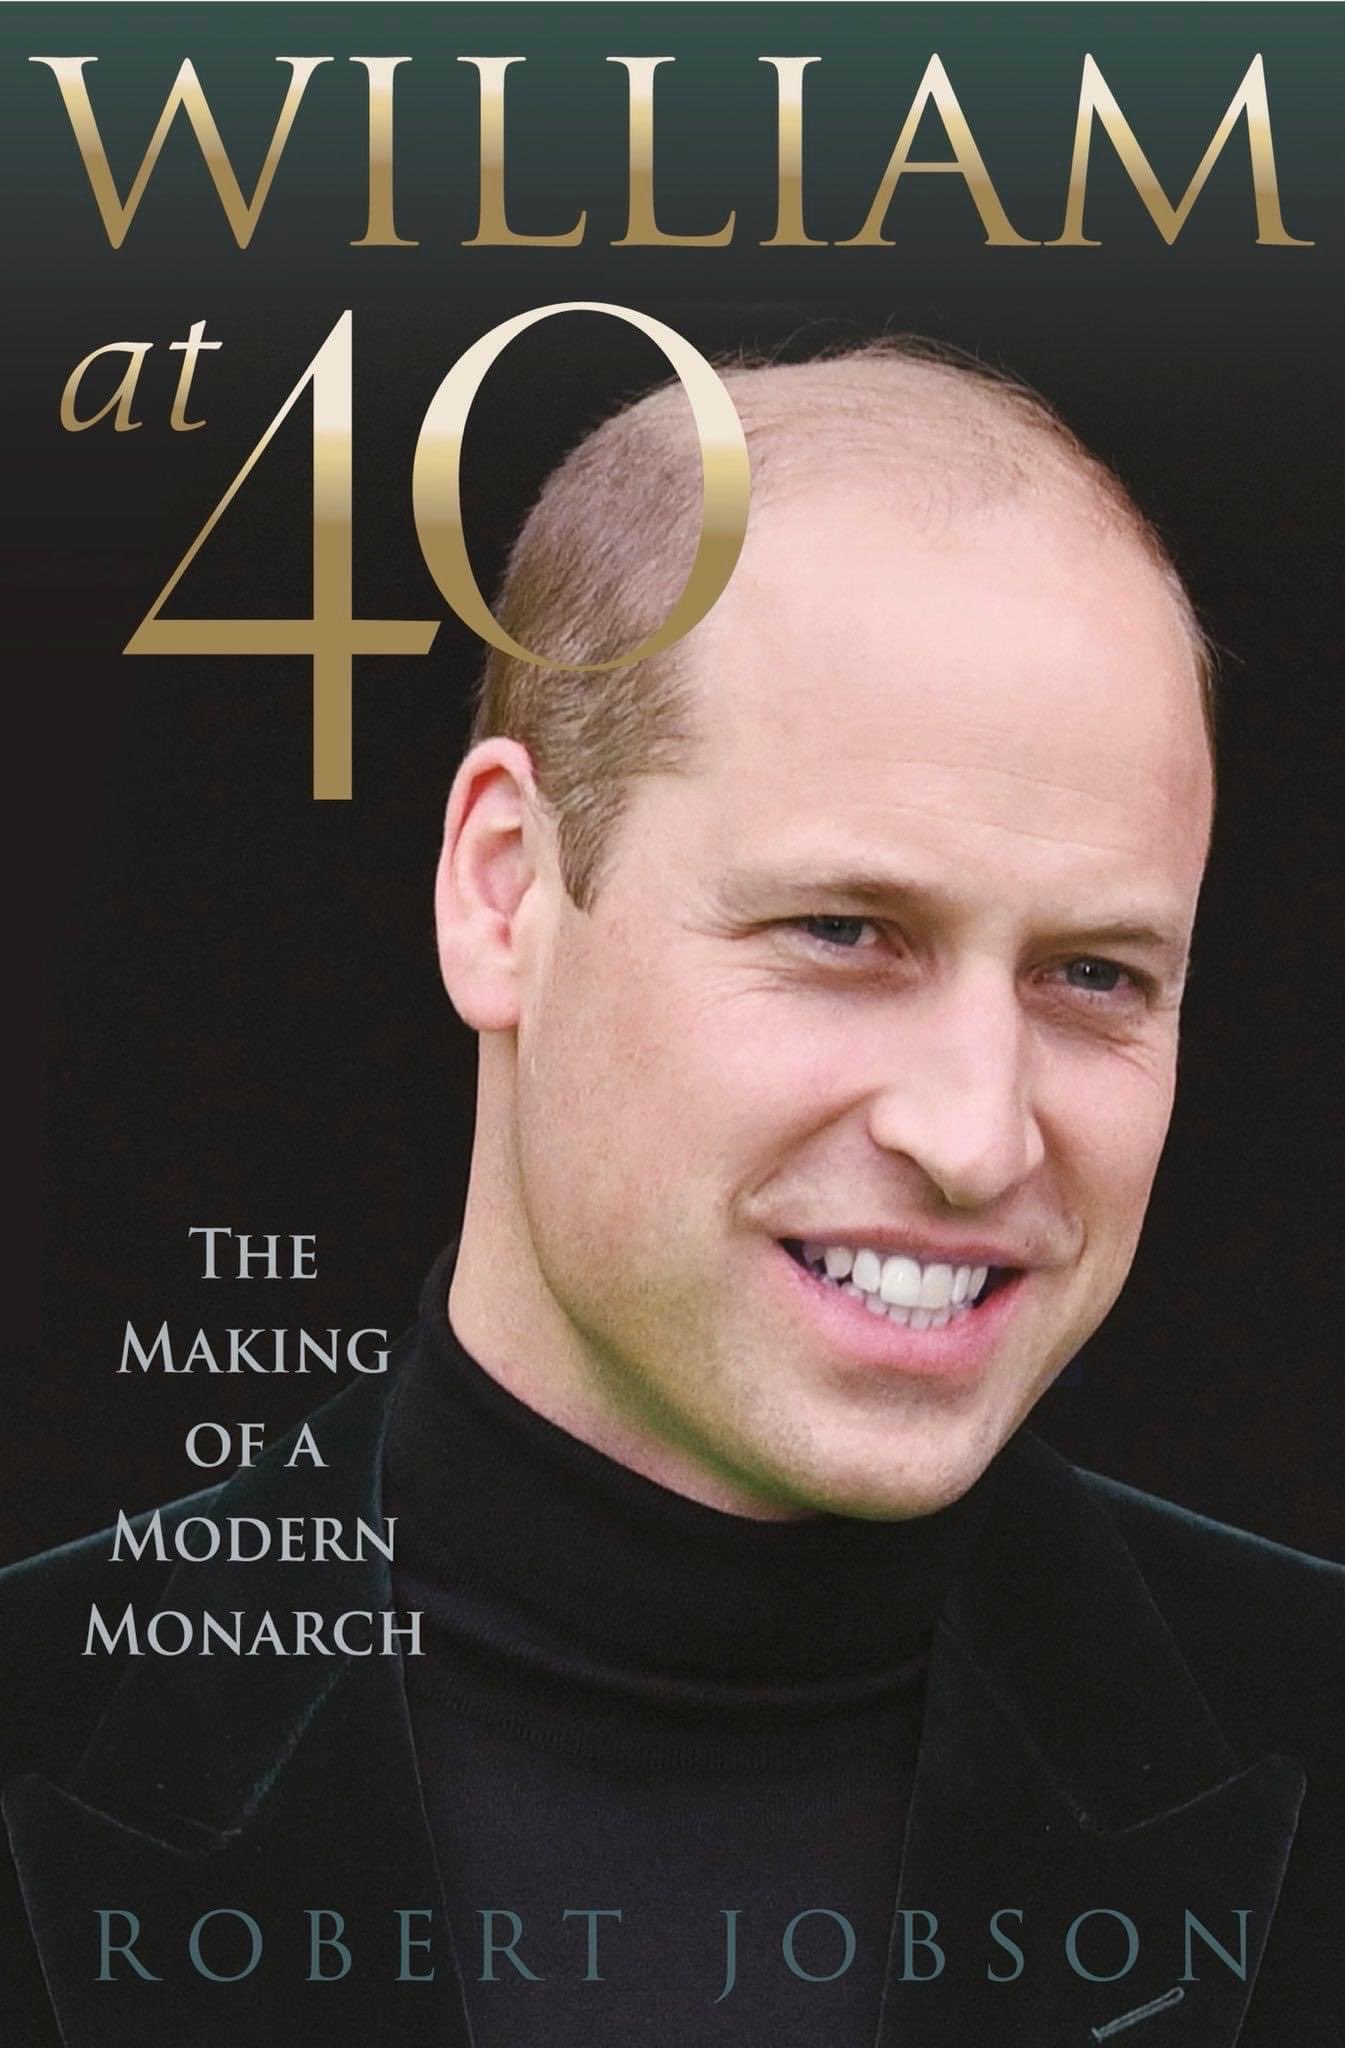 Happy Birthday To Prince William.
You make the world a better place        